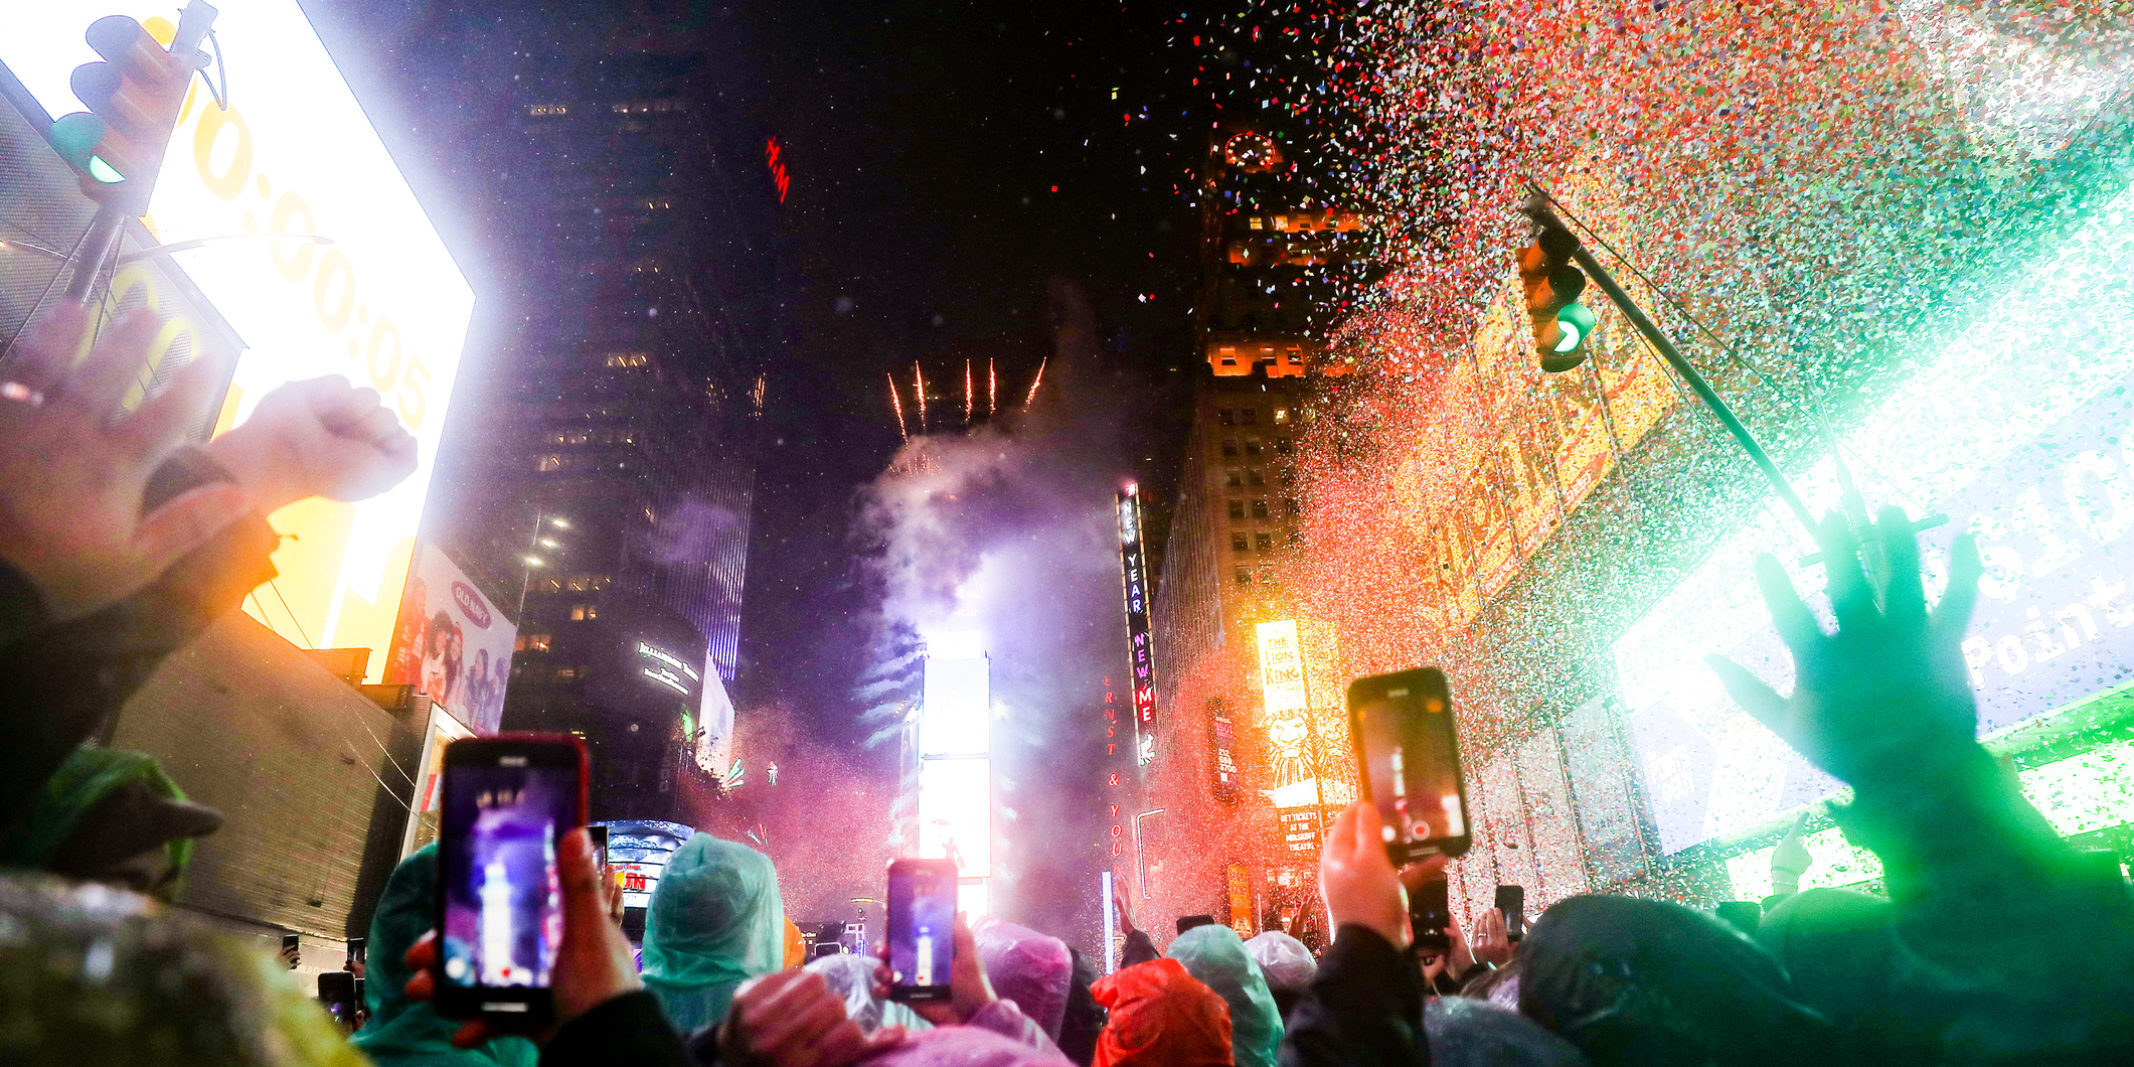 Crowd celebrating New Years Eve outside in Times Square, New York City.